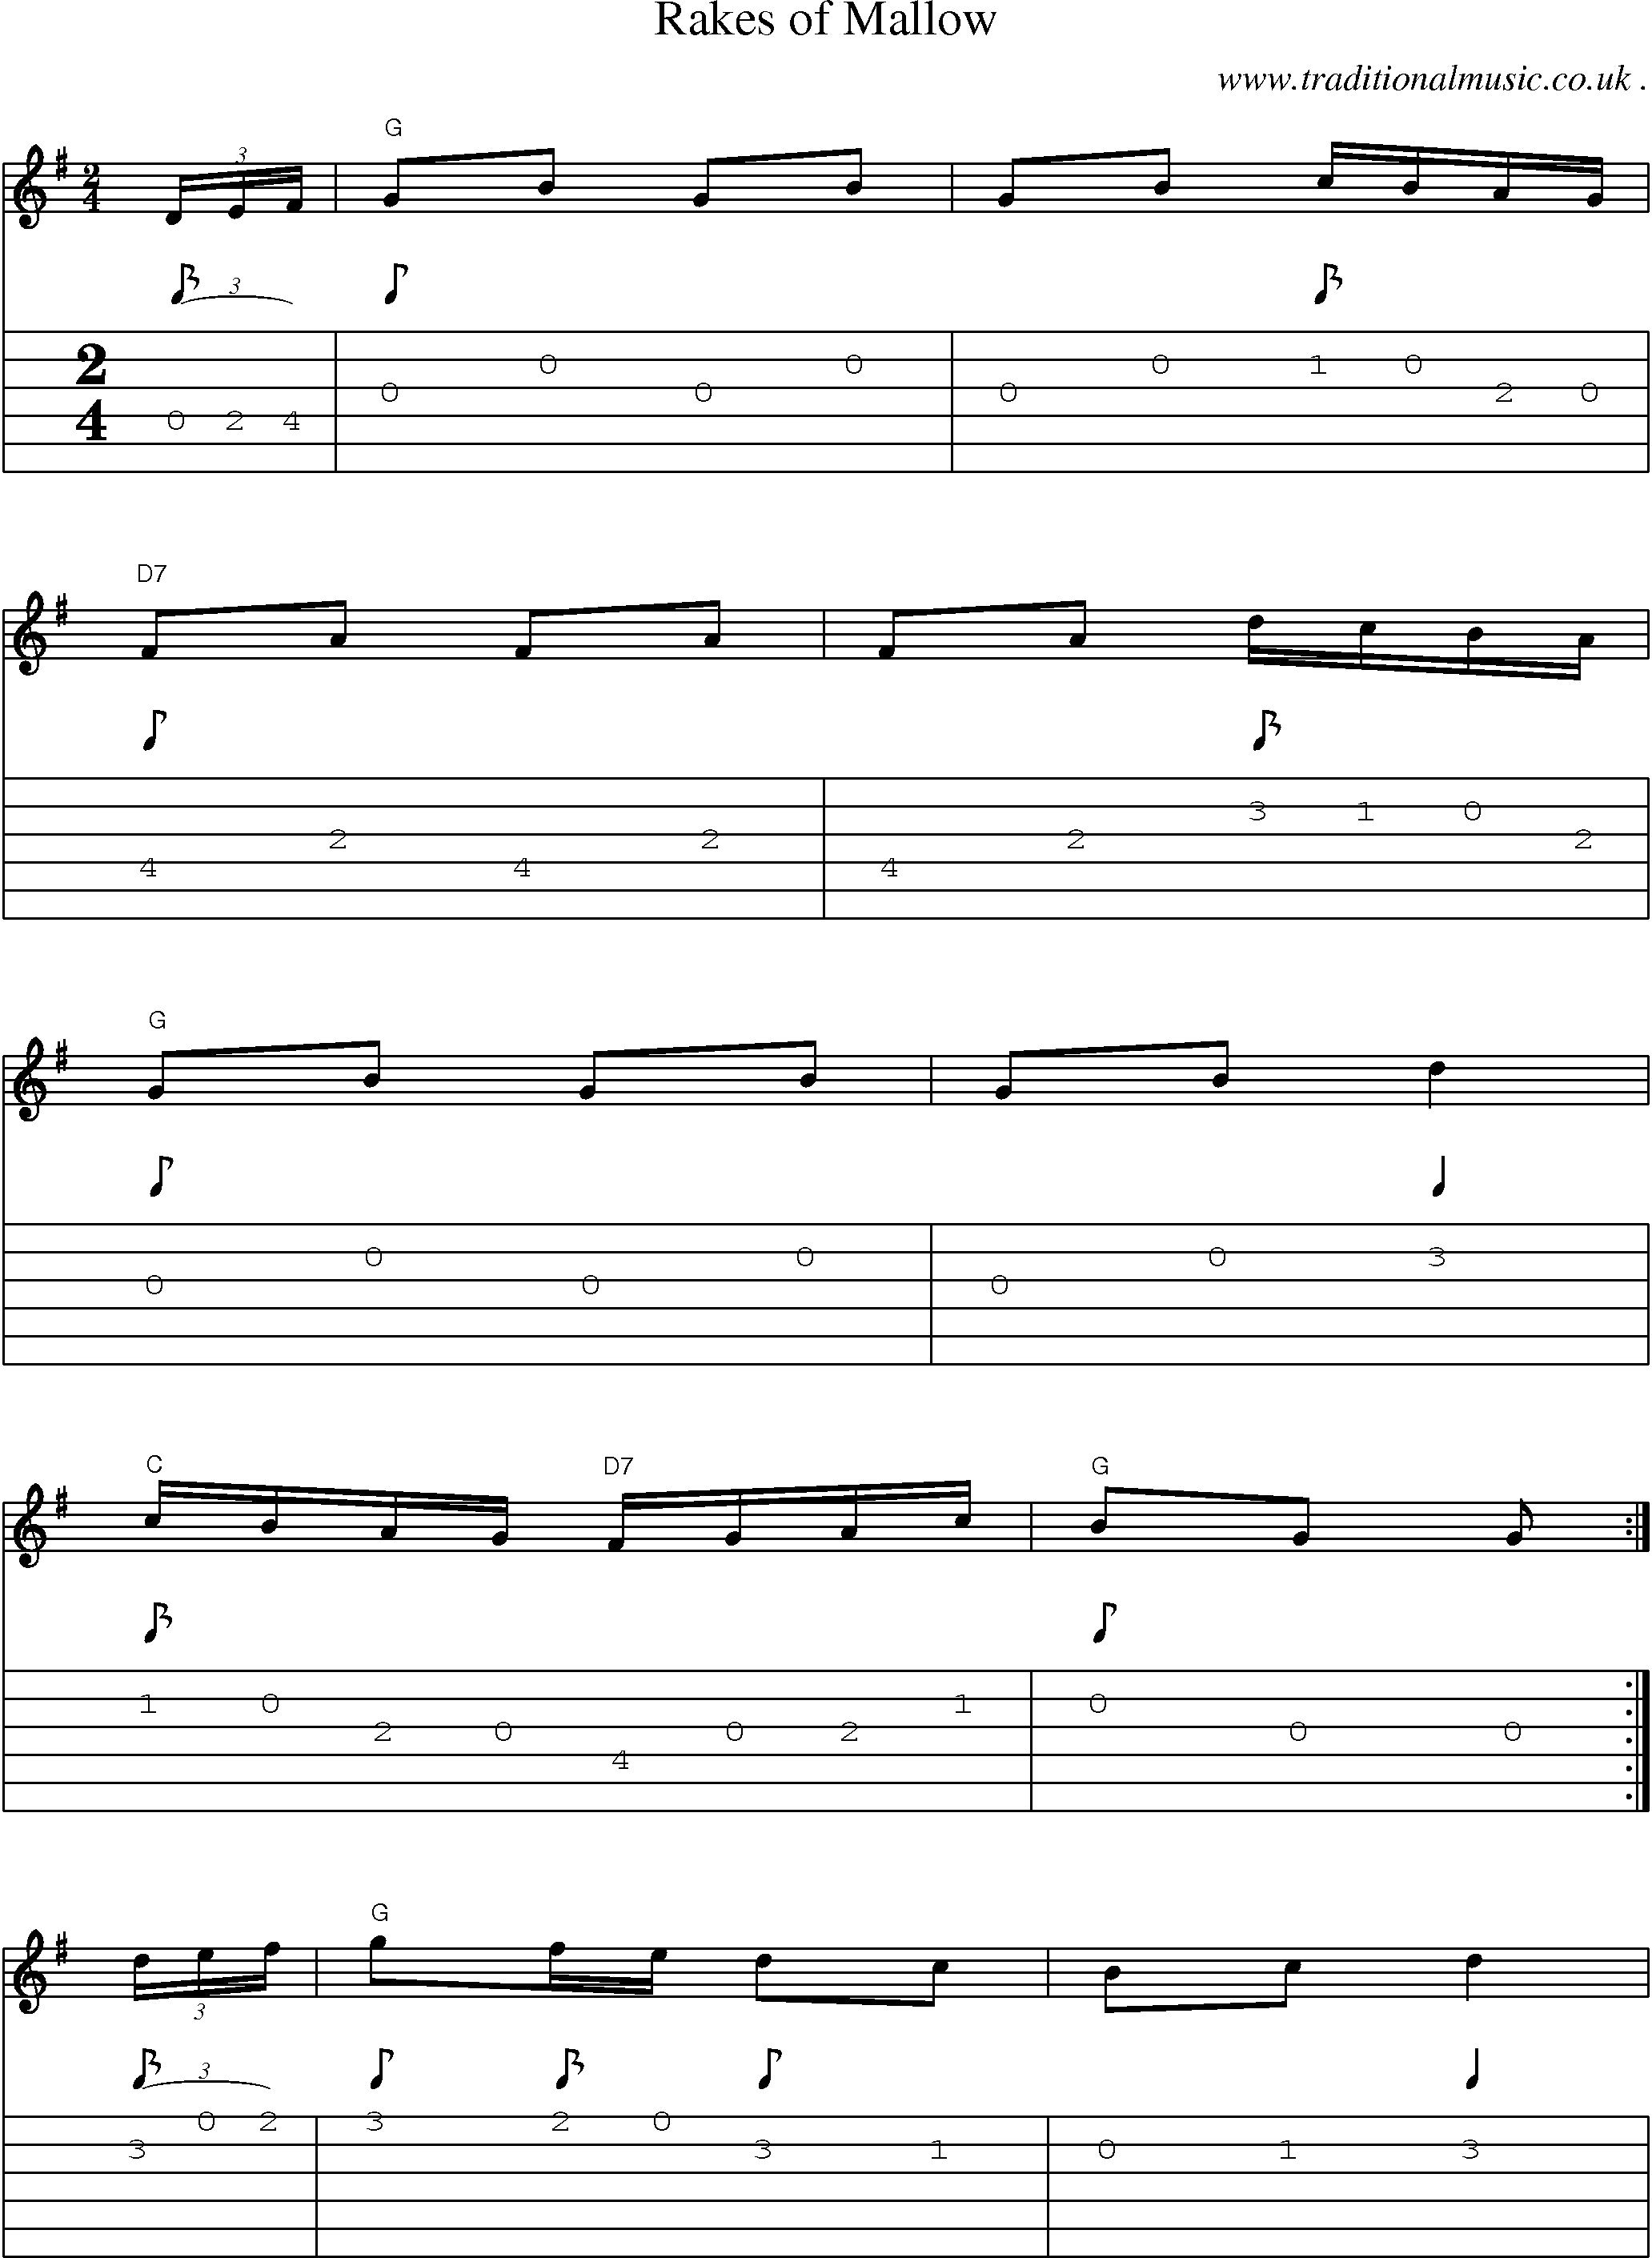 Music Score and Guitar Tabs for Rakes Of Mallow